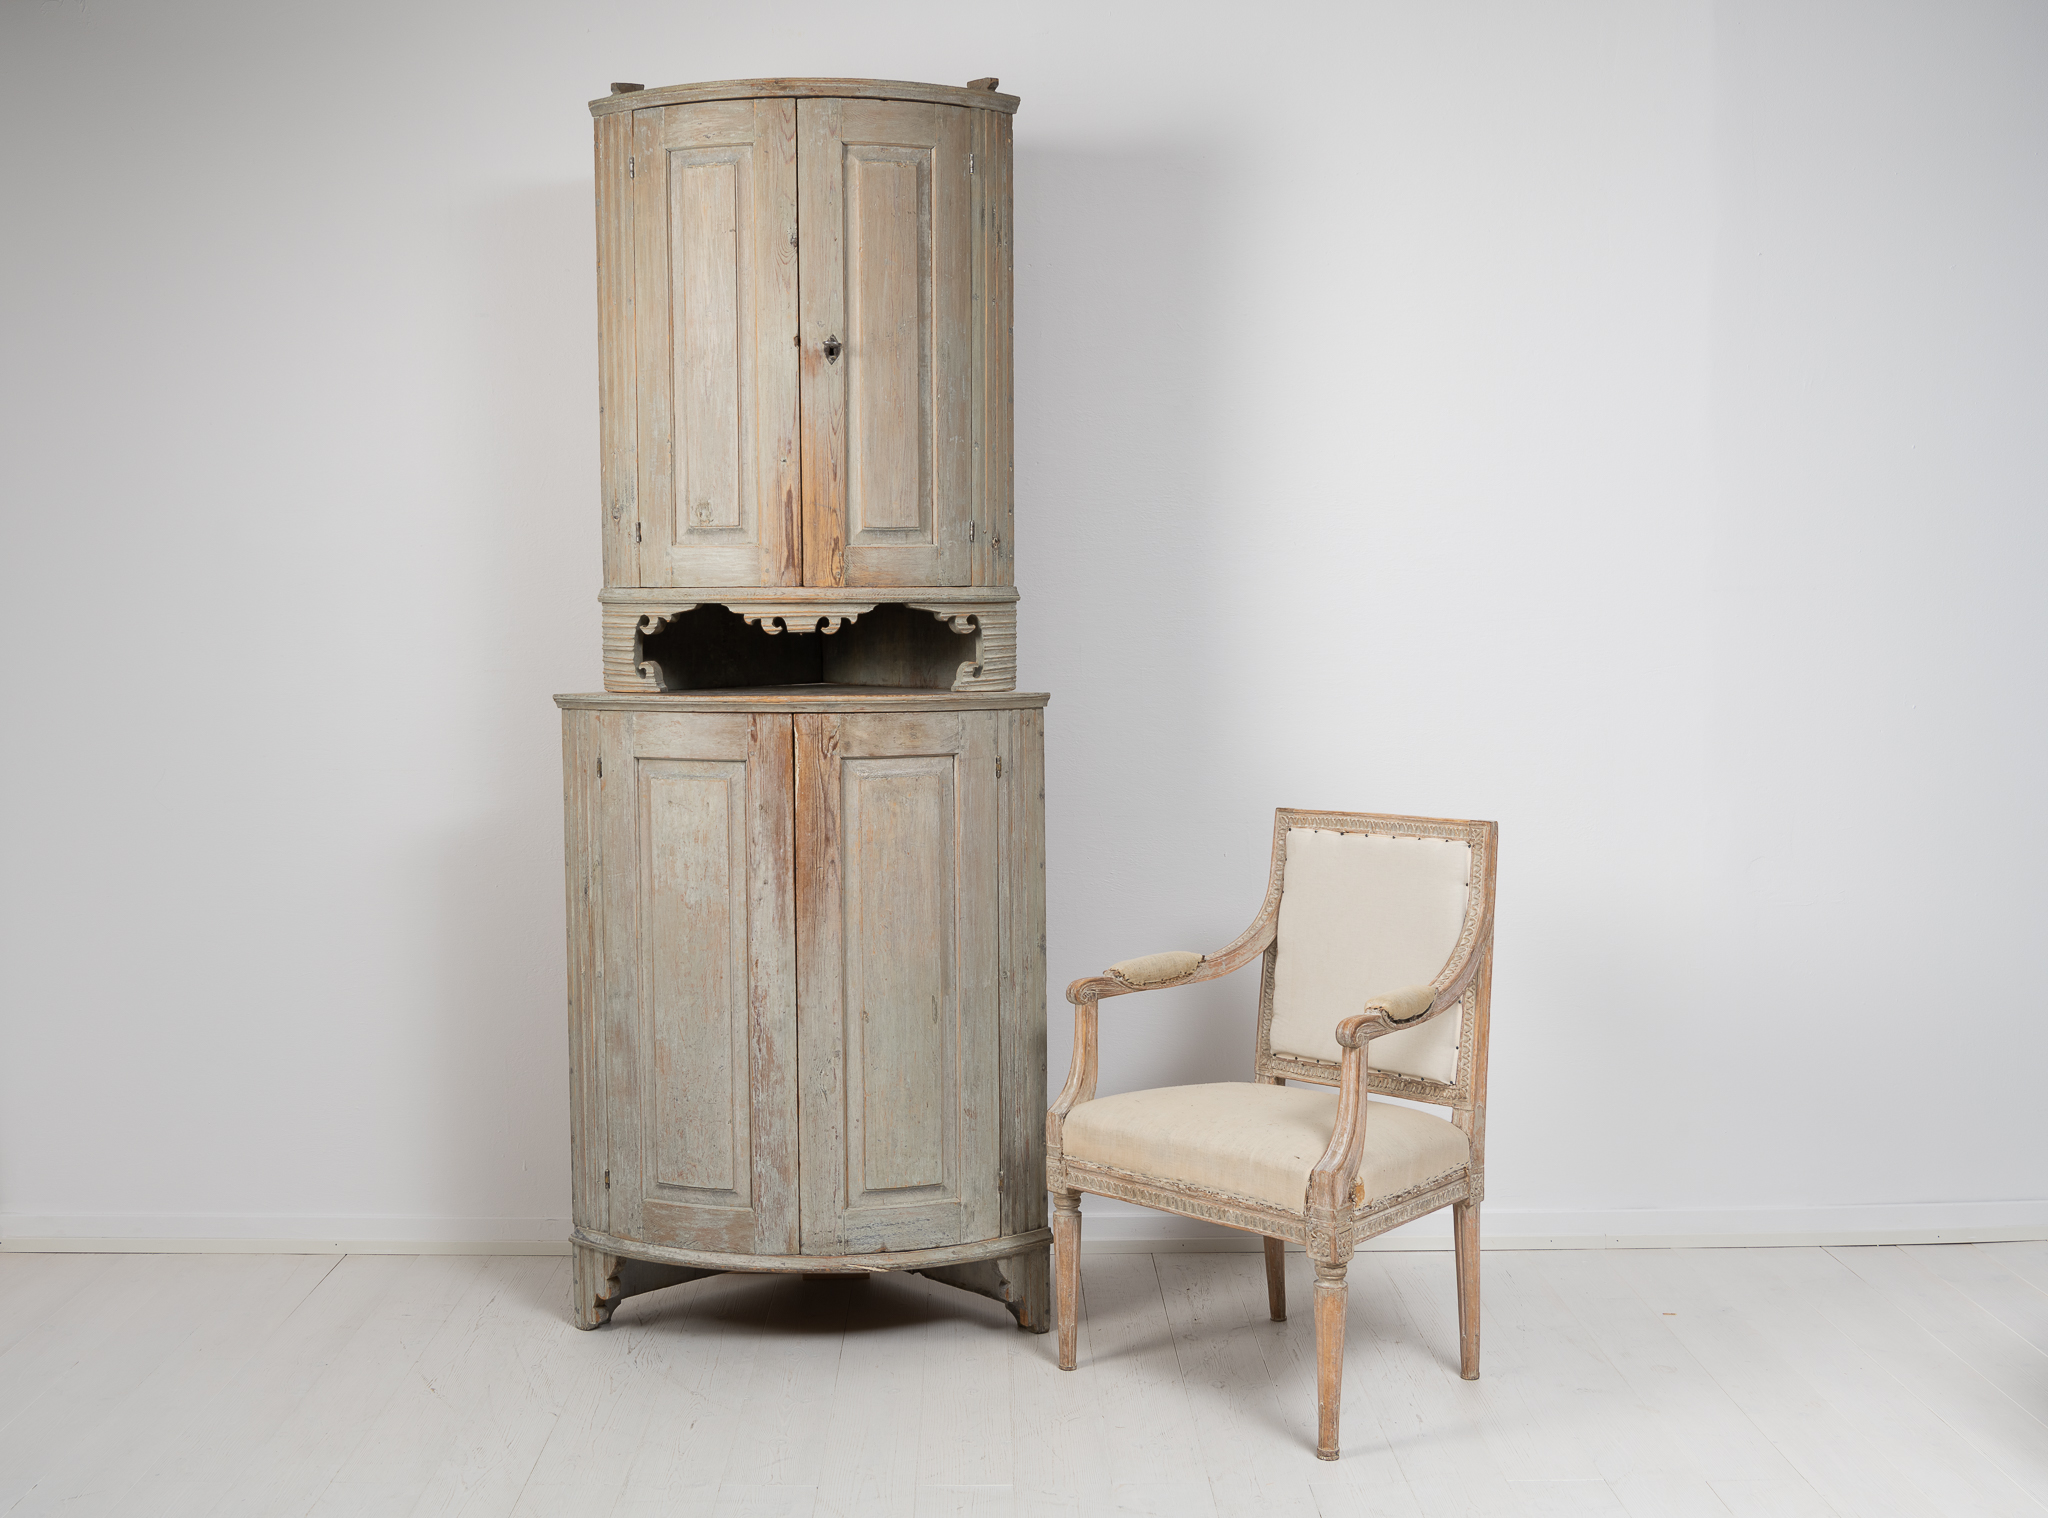 Tall gustavian corner cabinet in two parts. The cabinet has a rounded front with original paint from the time it was made